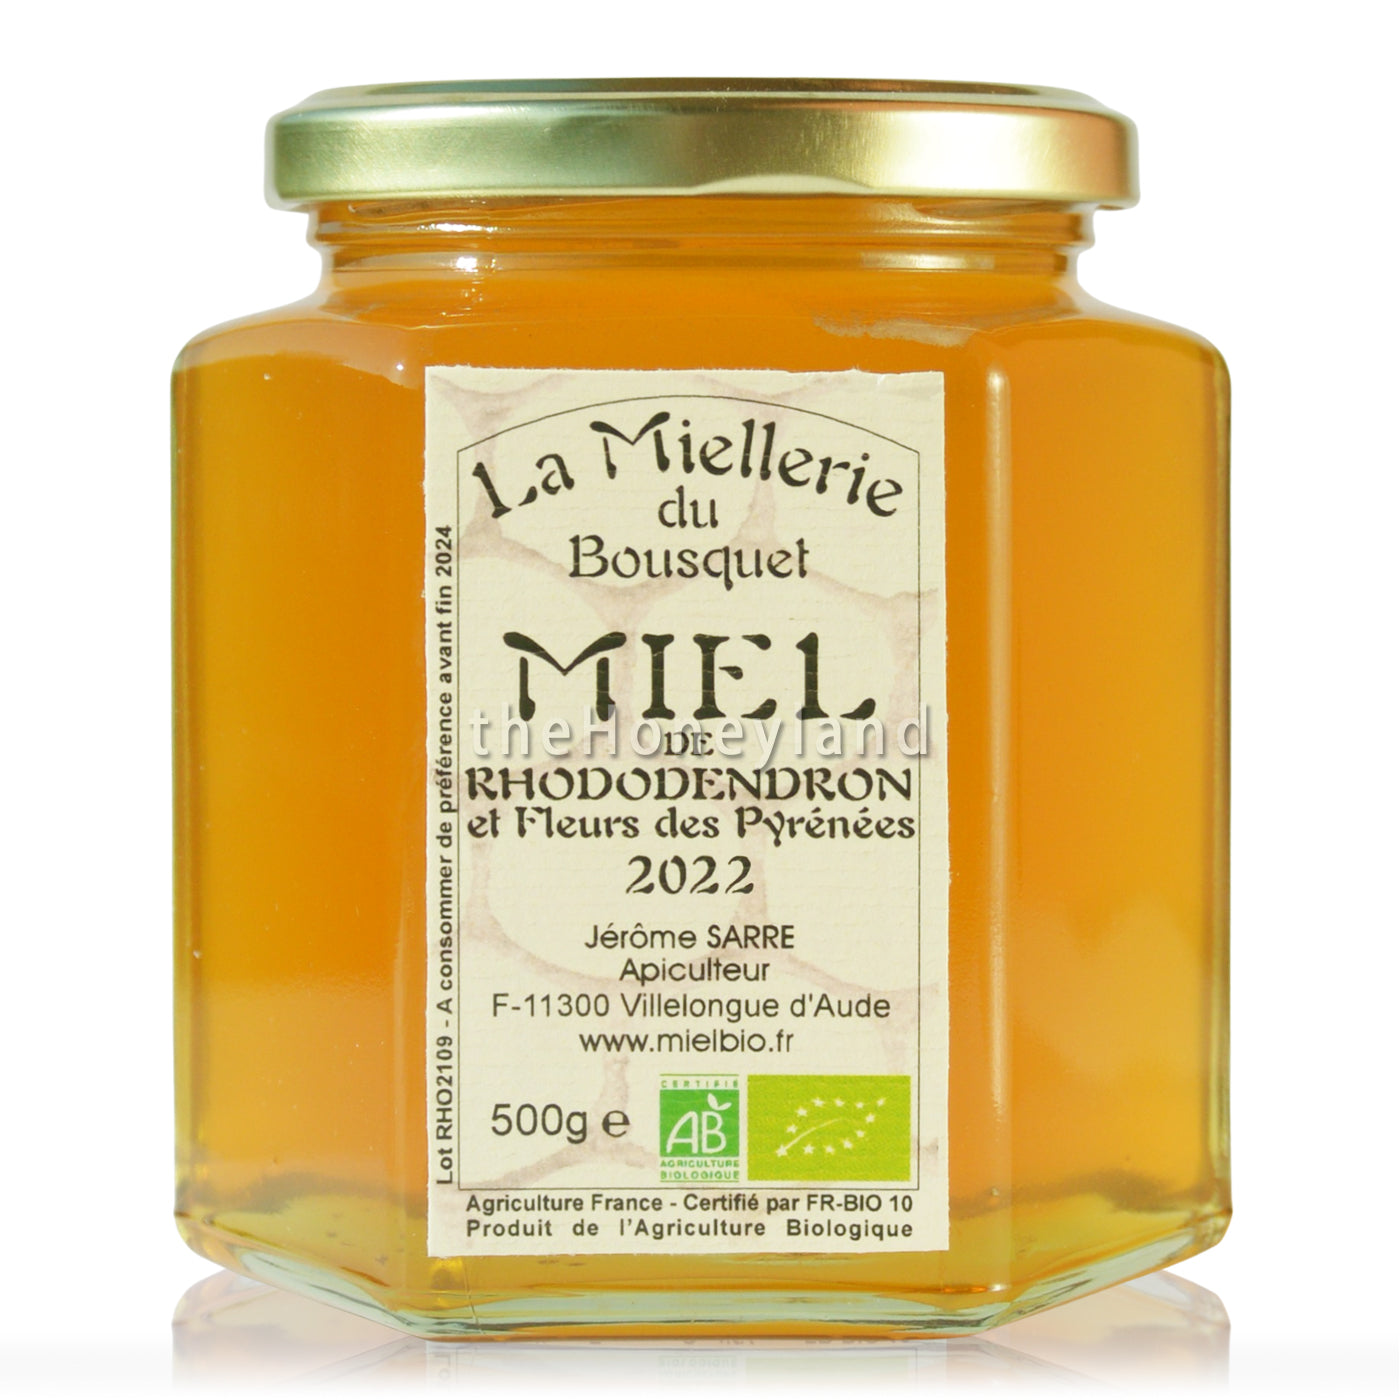 Organic wild rhododendron honey from the Pyrenees